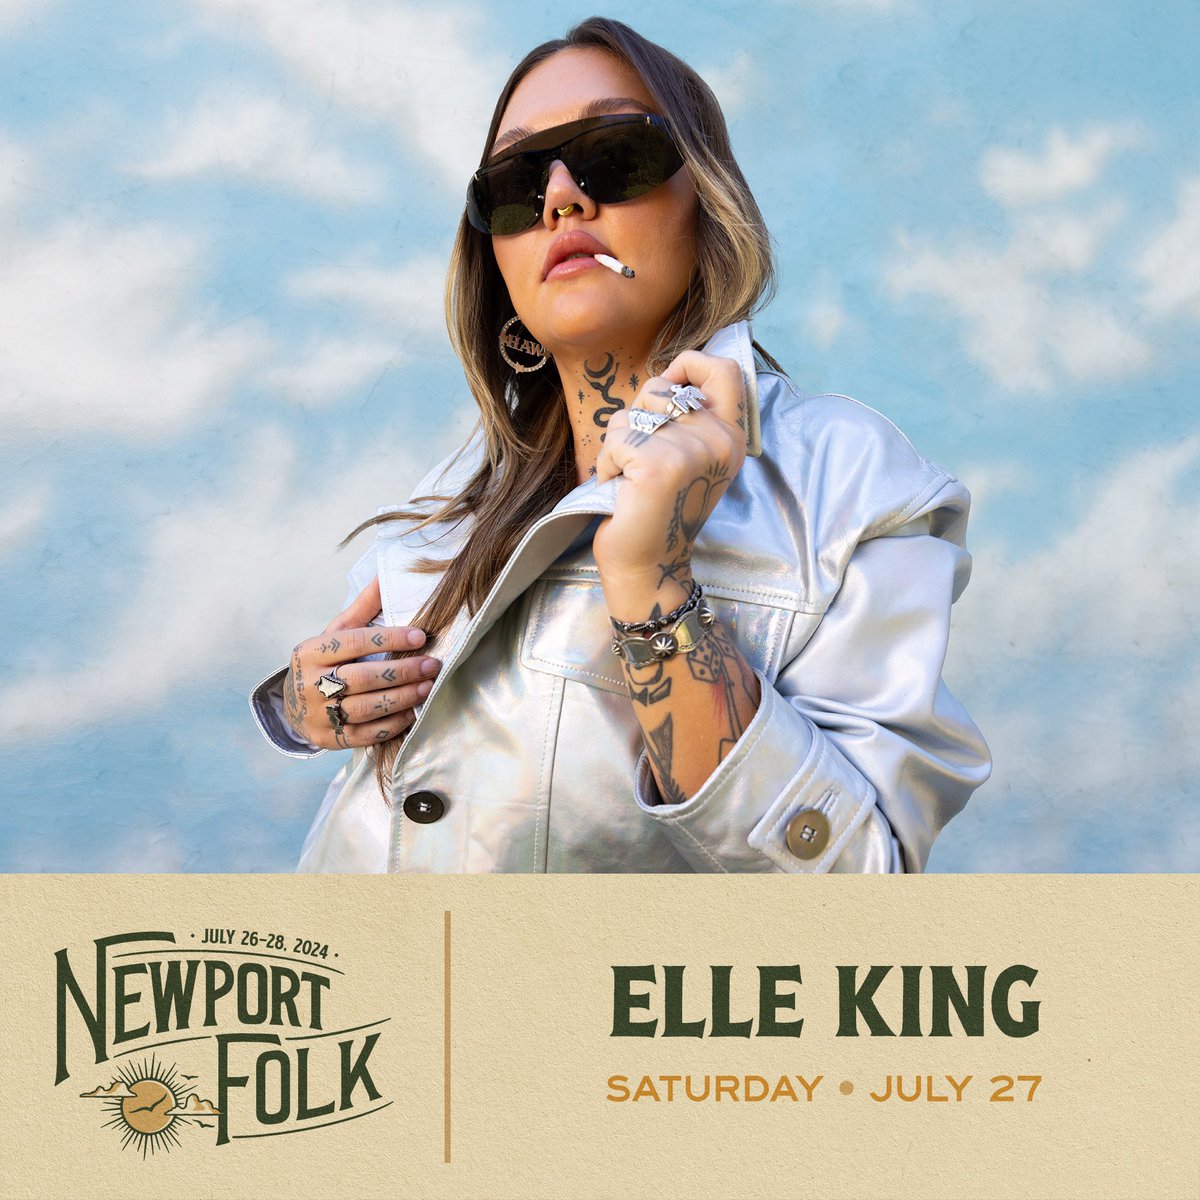 See you this summer @Newportfolkfest! tickets are sold out but you can register for the waitlist here: newportfolk.org/tickets